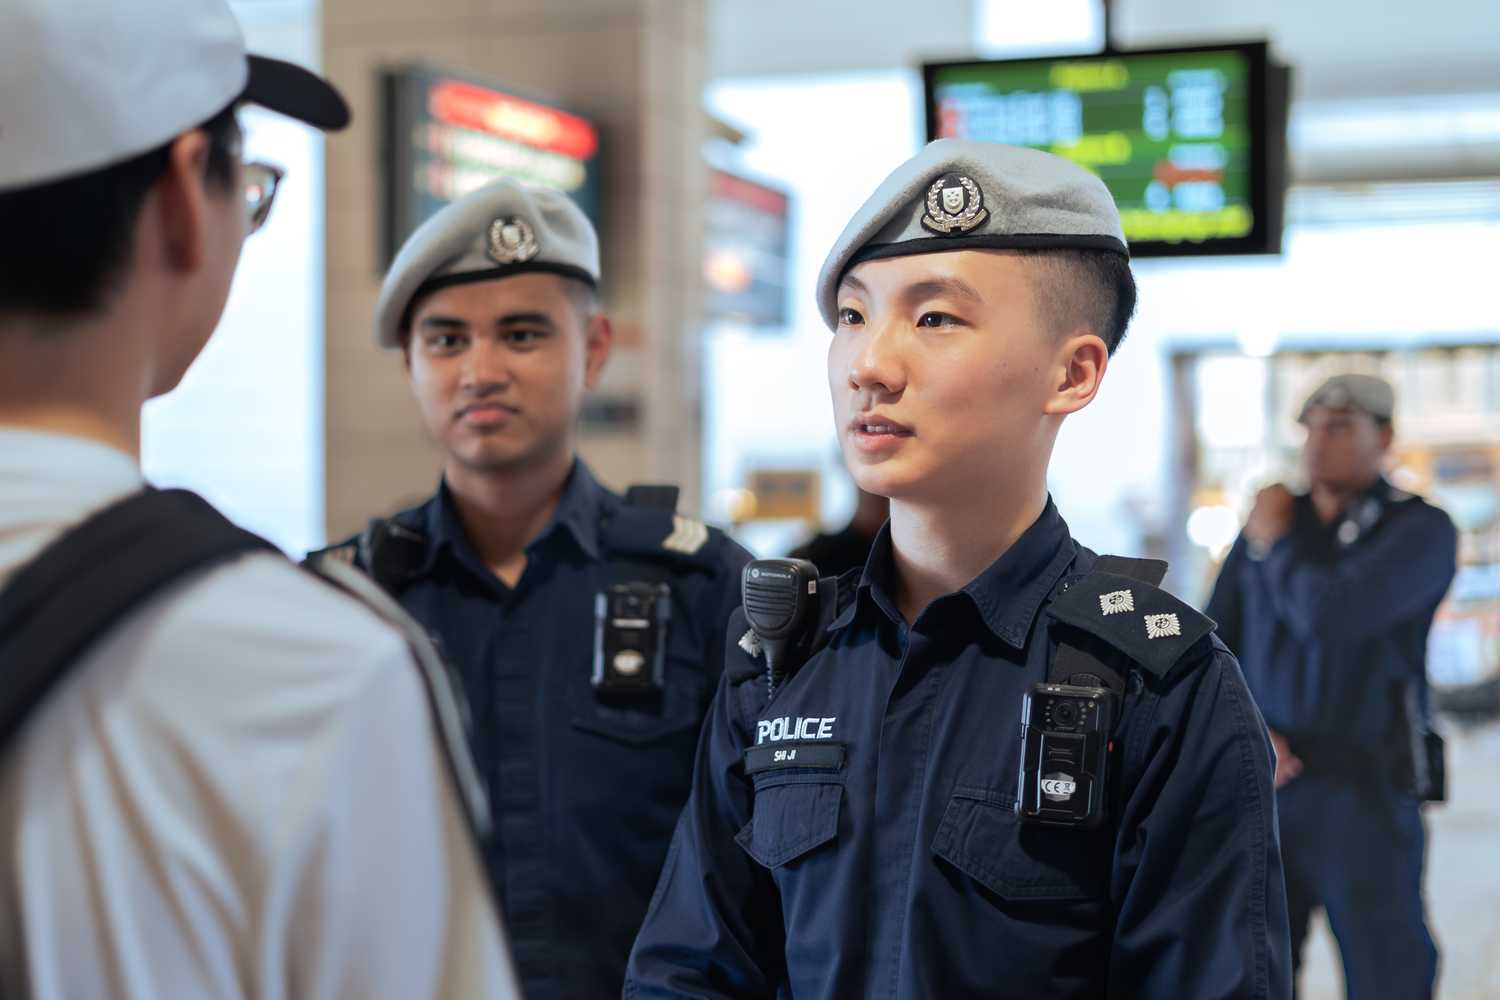 officer shi ji talking to a member of the public, who is chinese, wearing white, facing the right and carrying a black sling bag and wearing a cap